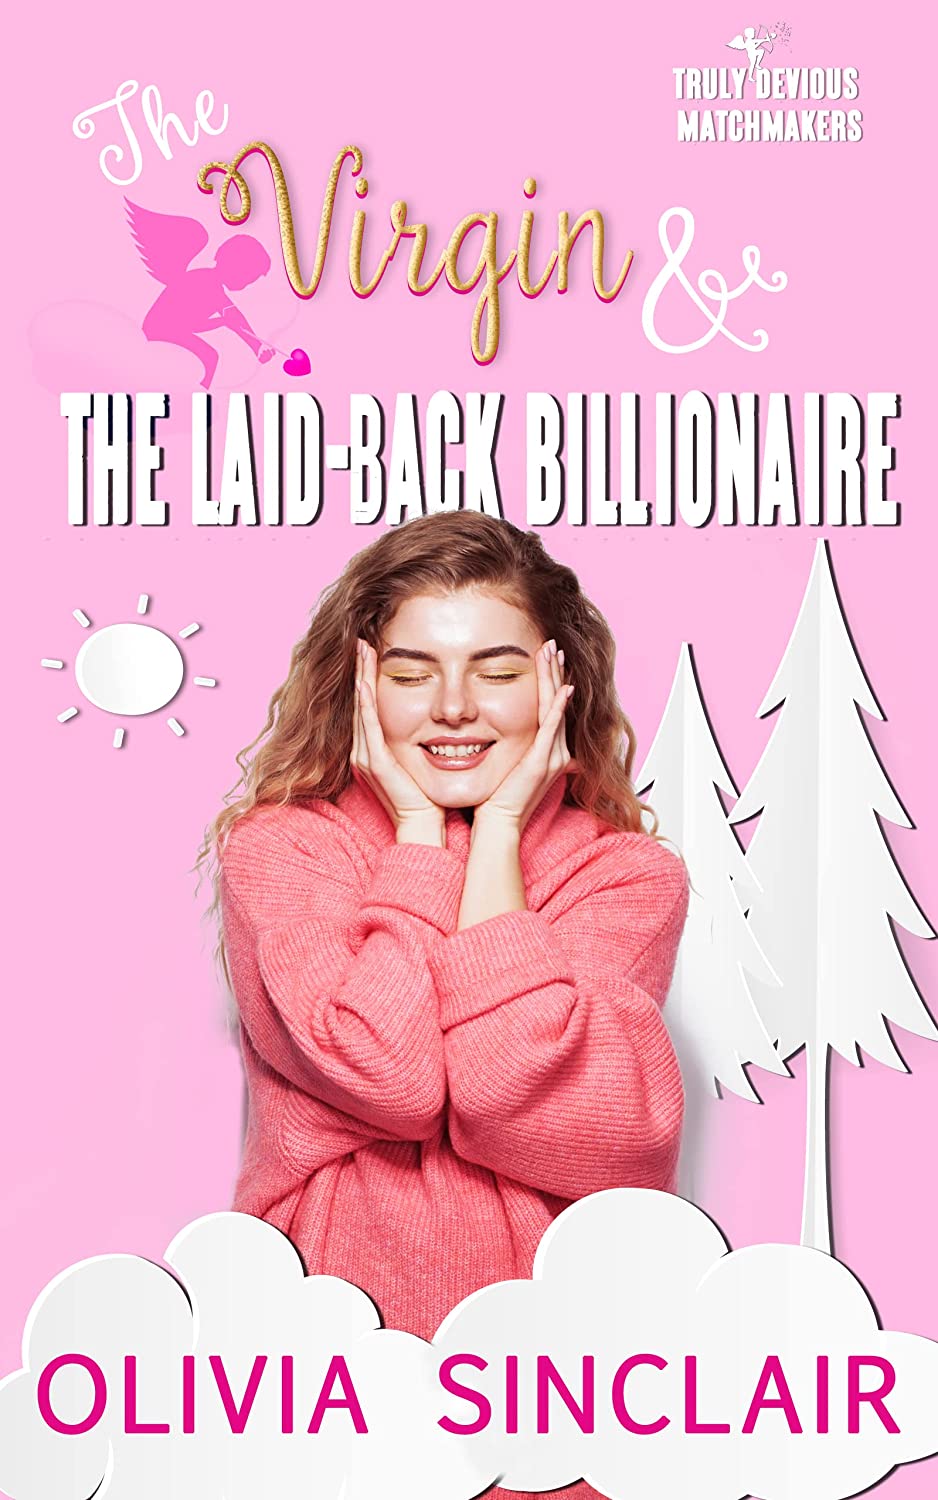 The Virgin and the Laid-back Billionaire by Olivia Sinclair PDF Download Video Library